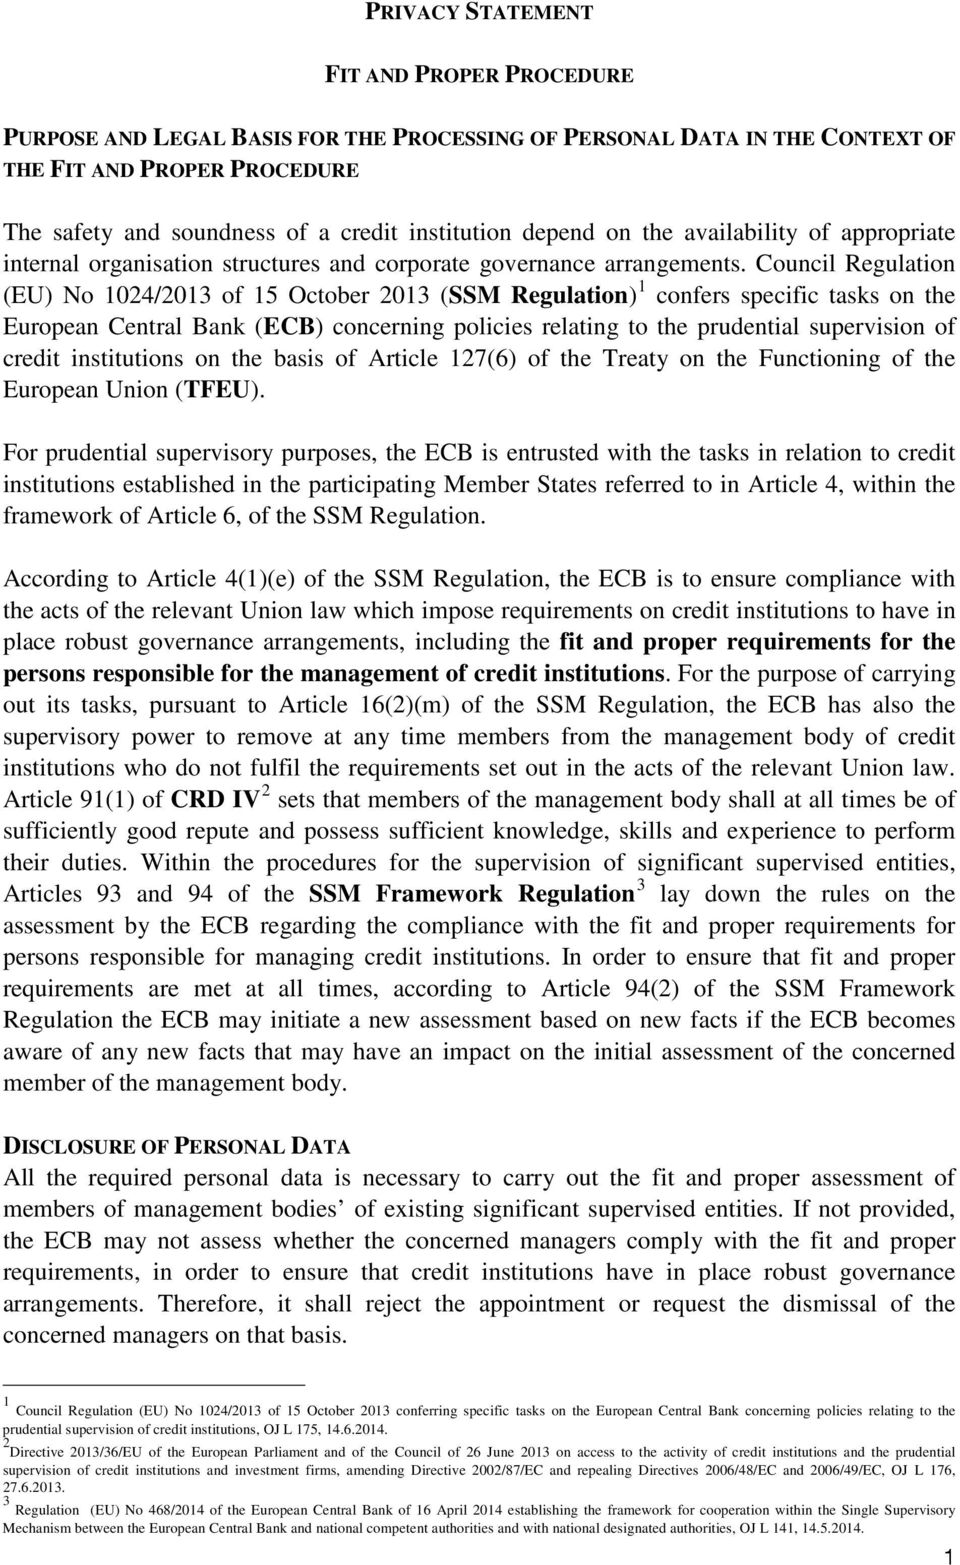 Council Regulation (EU) No 04/03 of 5 October 03 (SSM Regulation) confers specific tasks on the European Central Bank (ECB) concerning policies relating to the prudential supervision of credit